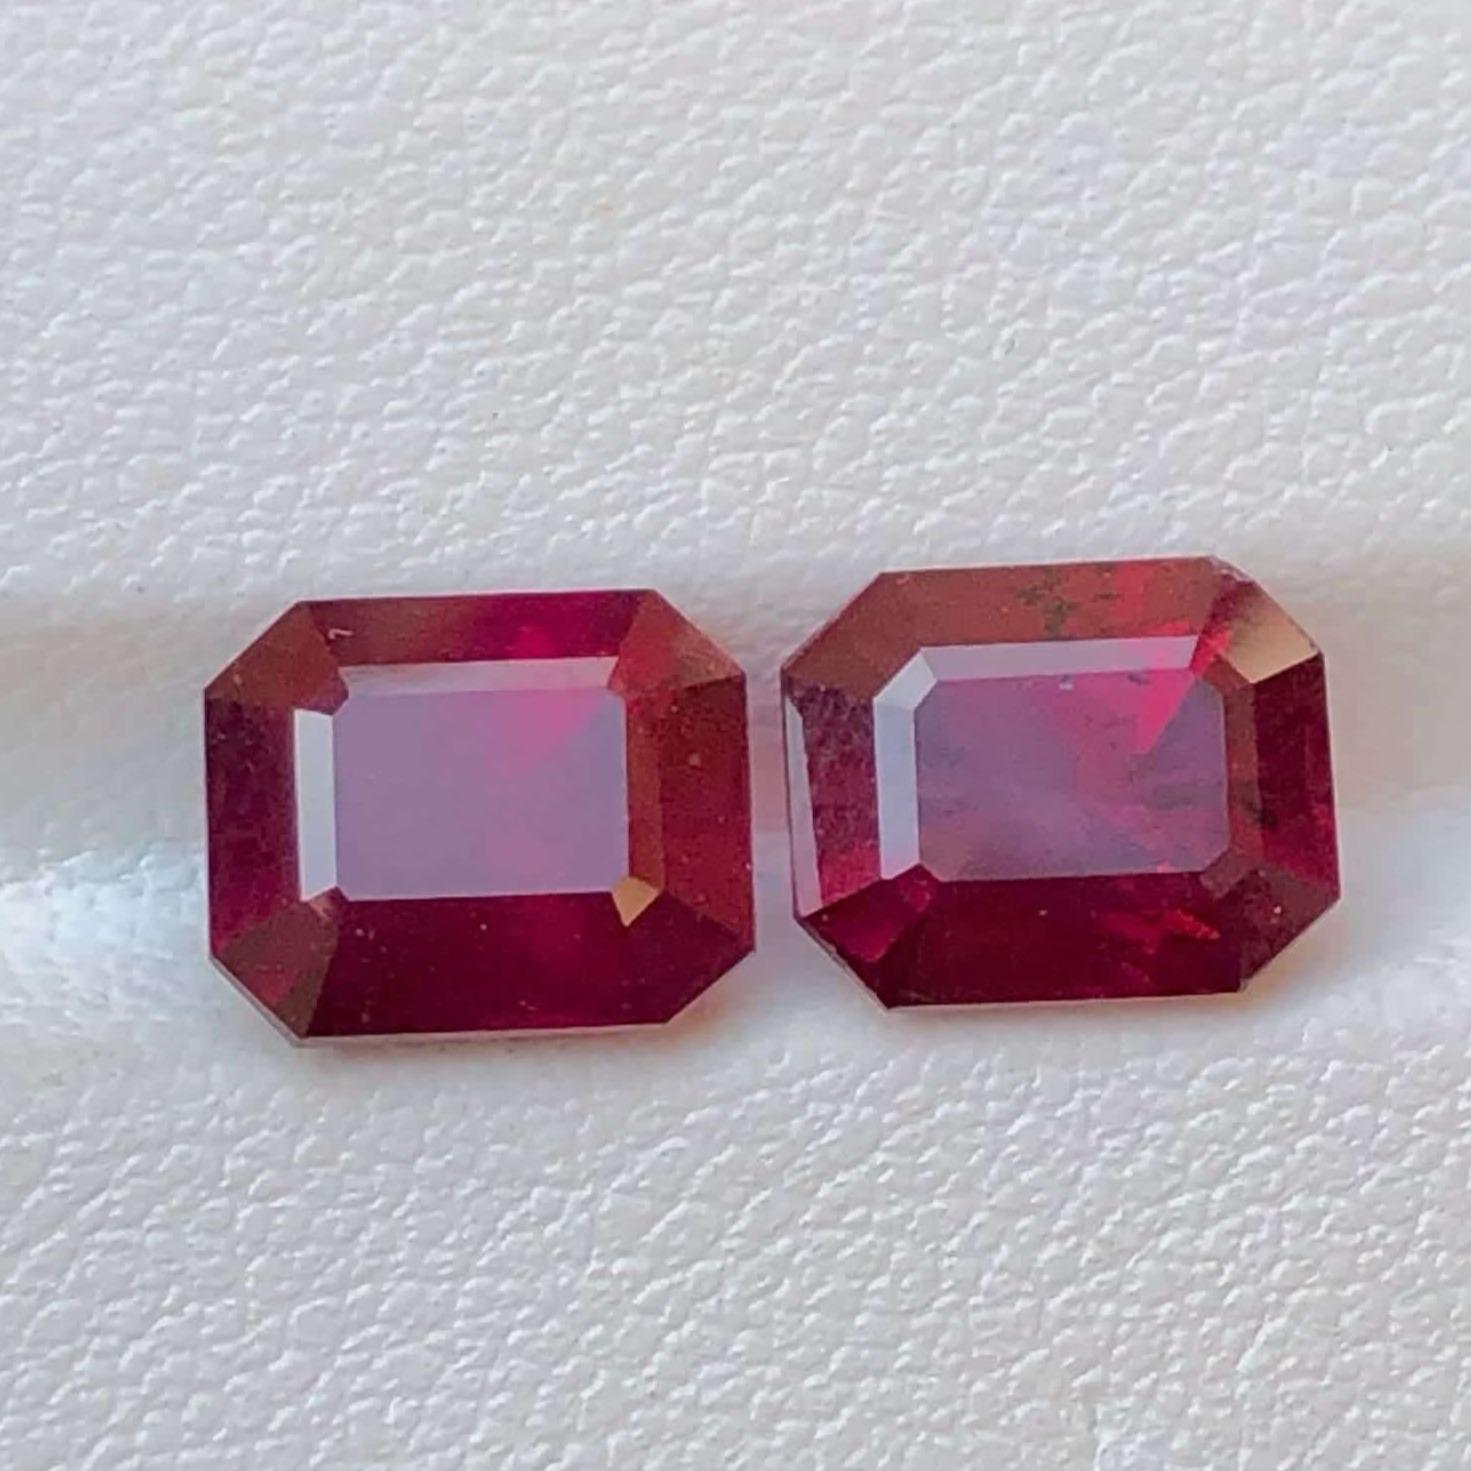 Gemstone Name Elegantly Simple Cherry Red Garnet Pair
Weight 6.60 carats (3.30 carats each)
Dimensions 8.8 x 7.2 mm each
Shape Step Emerald Cut
Locality Africa
Clarity SI
Treatment None




Indulge in the allure of these Elegantly Simple Cherry Red